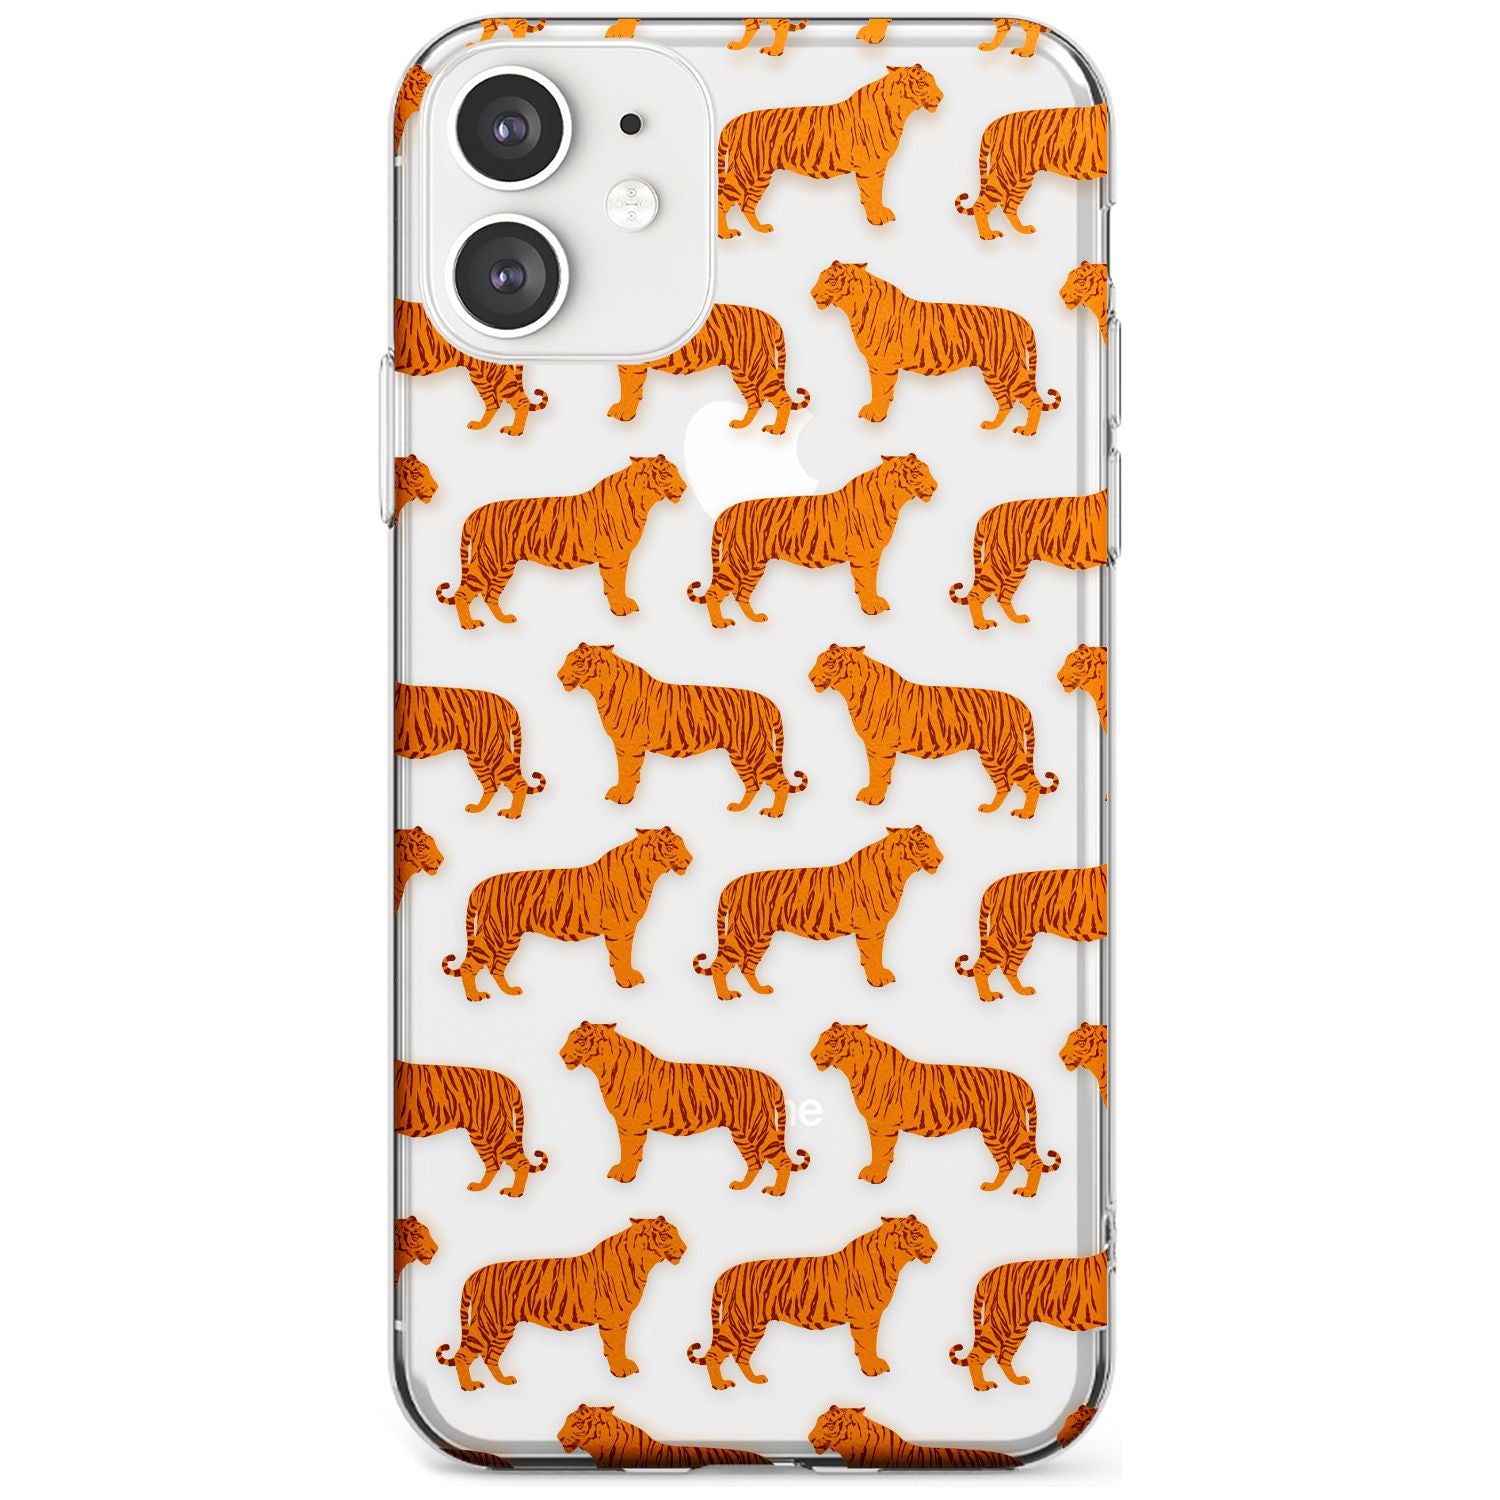 Tigers on Clear Pattern Slim TPU Phone Case for iPhone 11